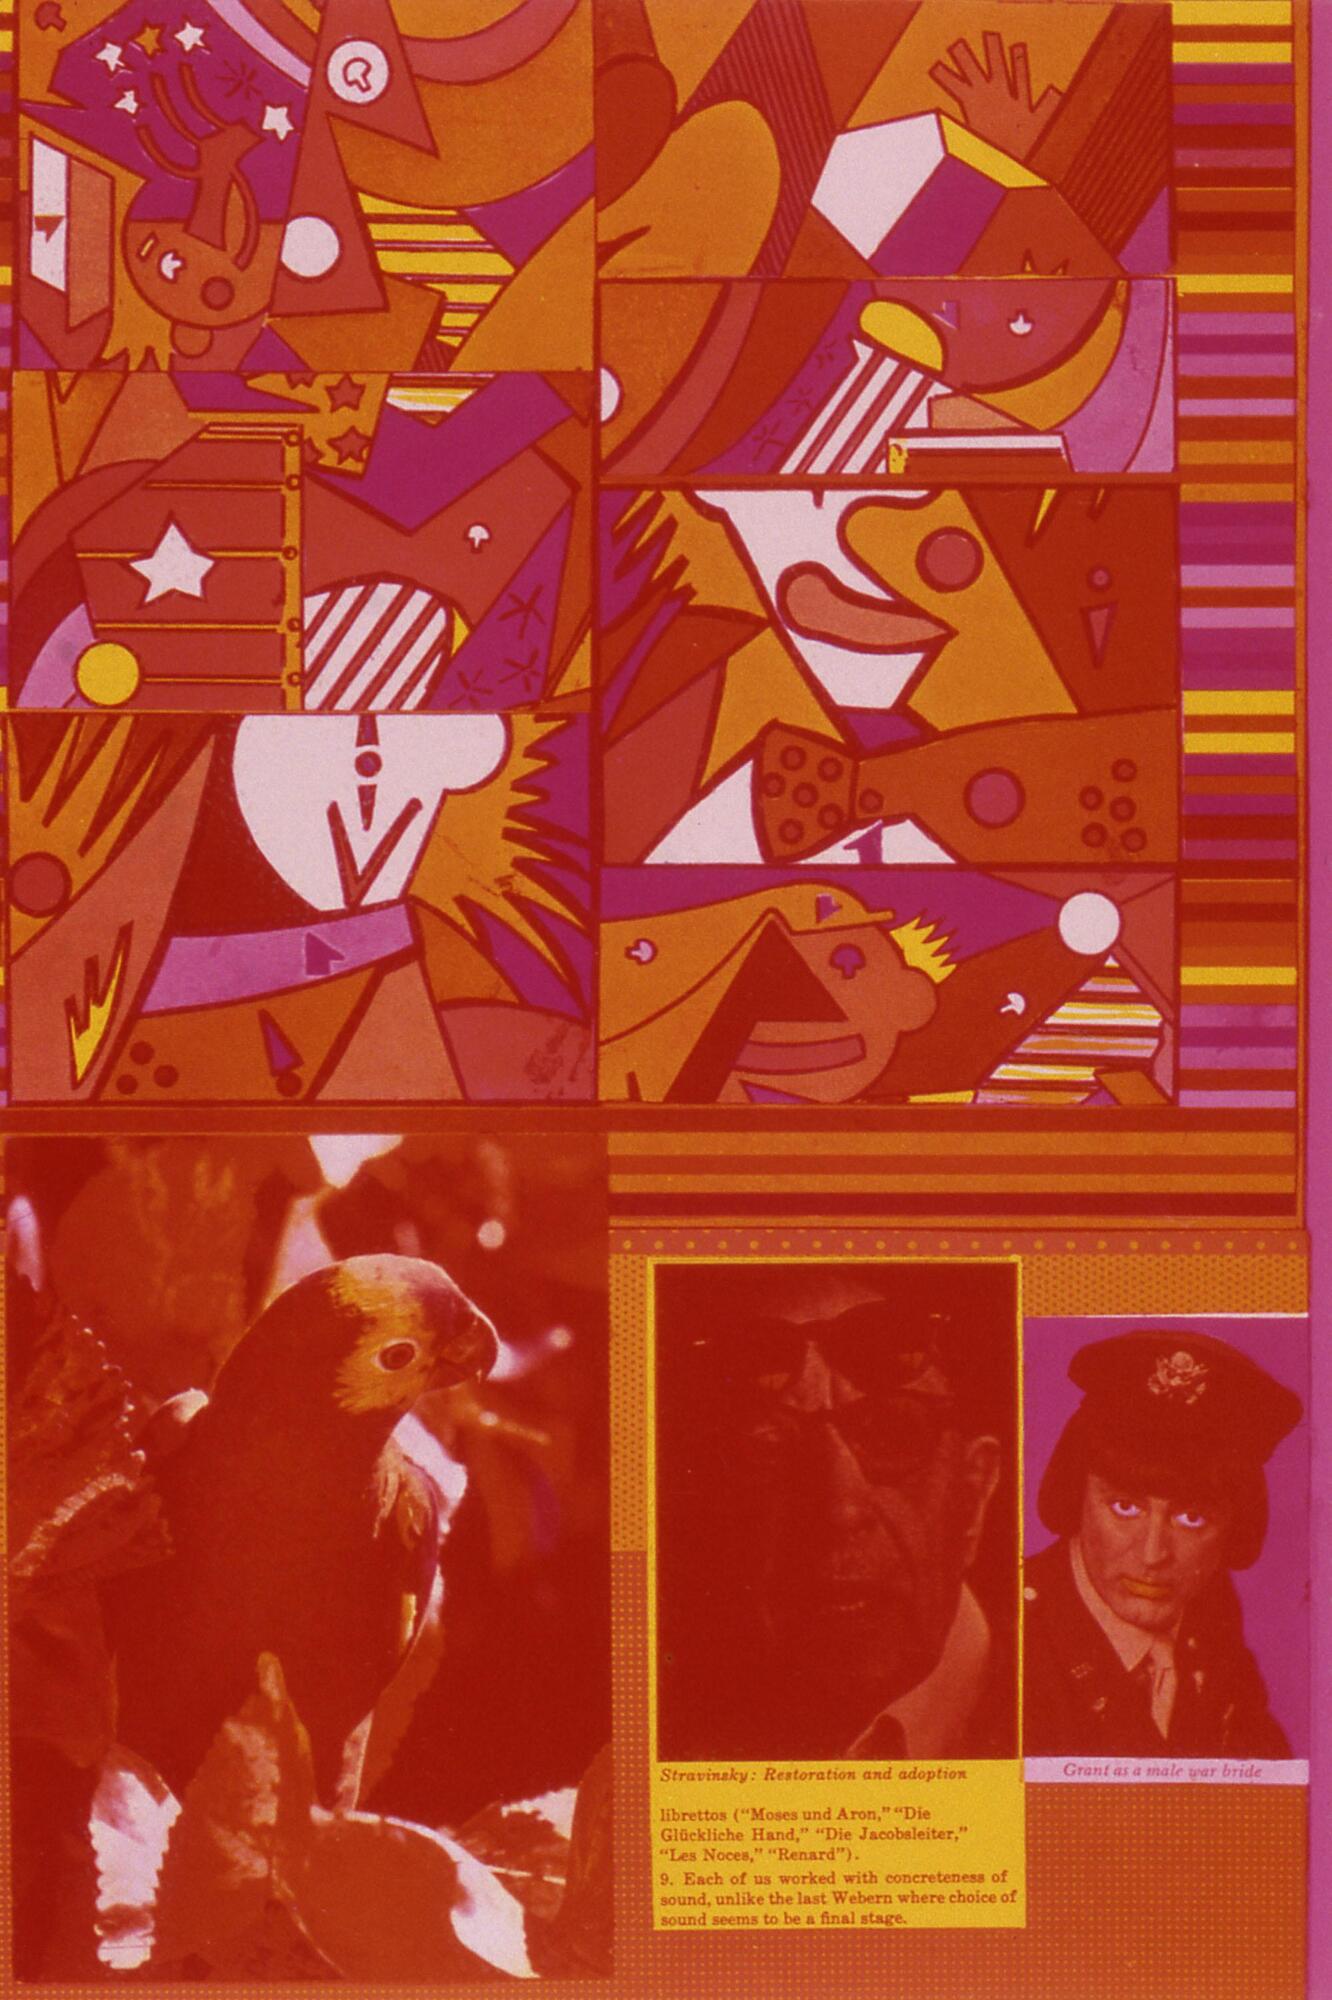 This photolithographic print in pink, red, orange and yellow is made of four main parts. A series of patterns from stripes at the top to small to tiny polka dots at the bottom make up the background. The stripes are in all the colors of the print, where the dots are only in orange and red. At the top left, there are a series of fragments of geometric scenes. In the bottom left, in orange, red and yellow, there is a bird, likely a parakeet. Then to the right at the bottom, there are two photographs of white men. On the right, there is a photograph of an older man with one pair of prescription glasses on and a pair of sunglasses resting on his forehead with the text below that reads: "<em>Stravinsky: Restoration and adaptation</em> / librettos ('Moses und Aron,' 'Die Glückliche Hand,' 'Die Jacobsleiter,' 'Les Noces,' 'Renard'). / 9. Each of us worked with concreteness of sound, unlike the last Webern where choice of sound seems to be a final stage." On the left, there is a man in three-quarter view with sholder